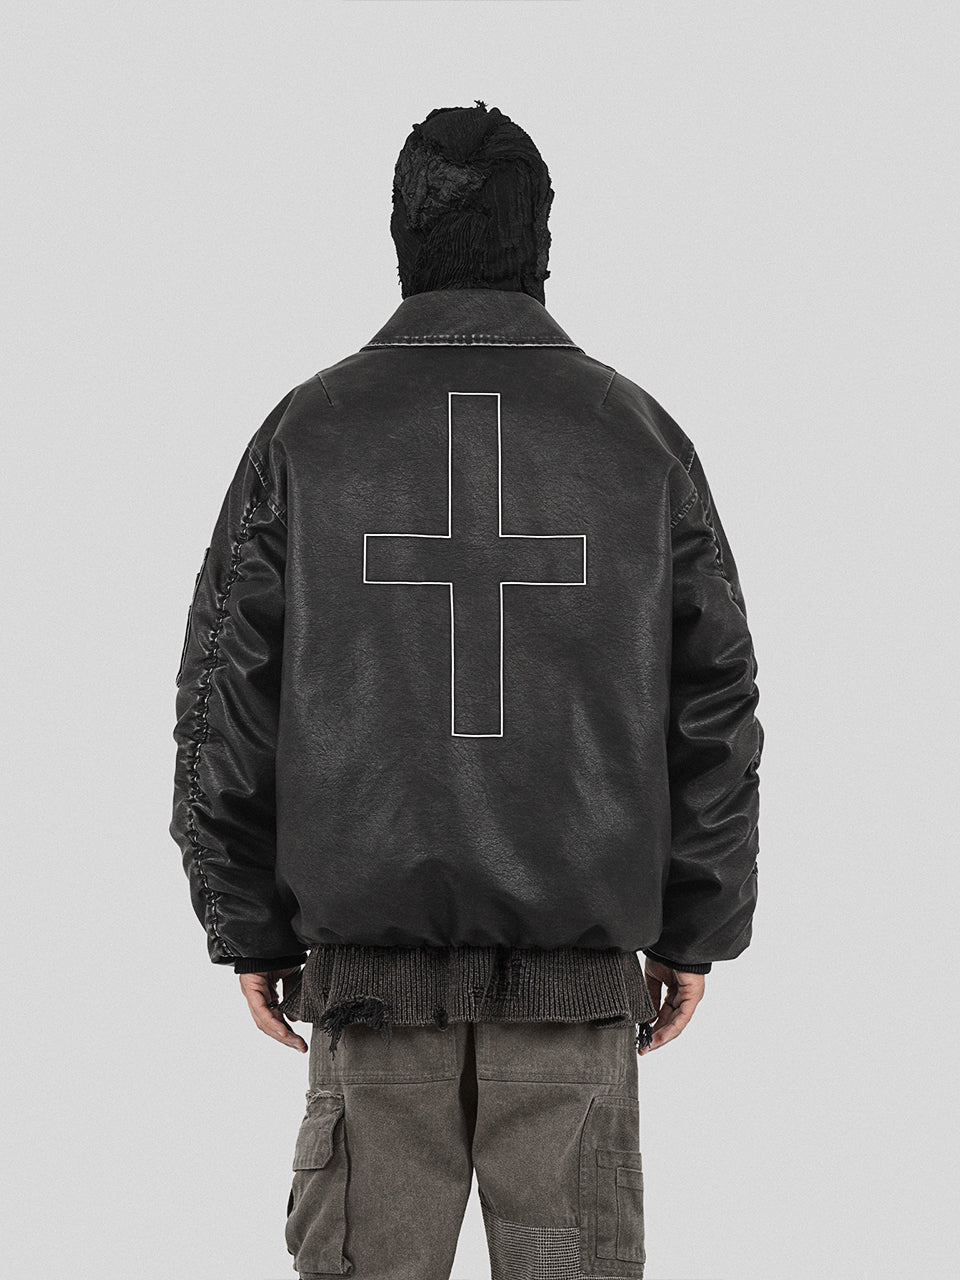 UNDERWATER Cross Embroidered Down Leather Bomber Jacket MA-1